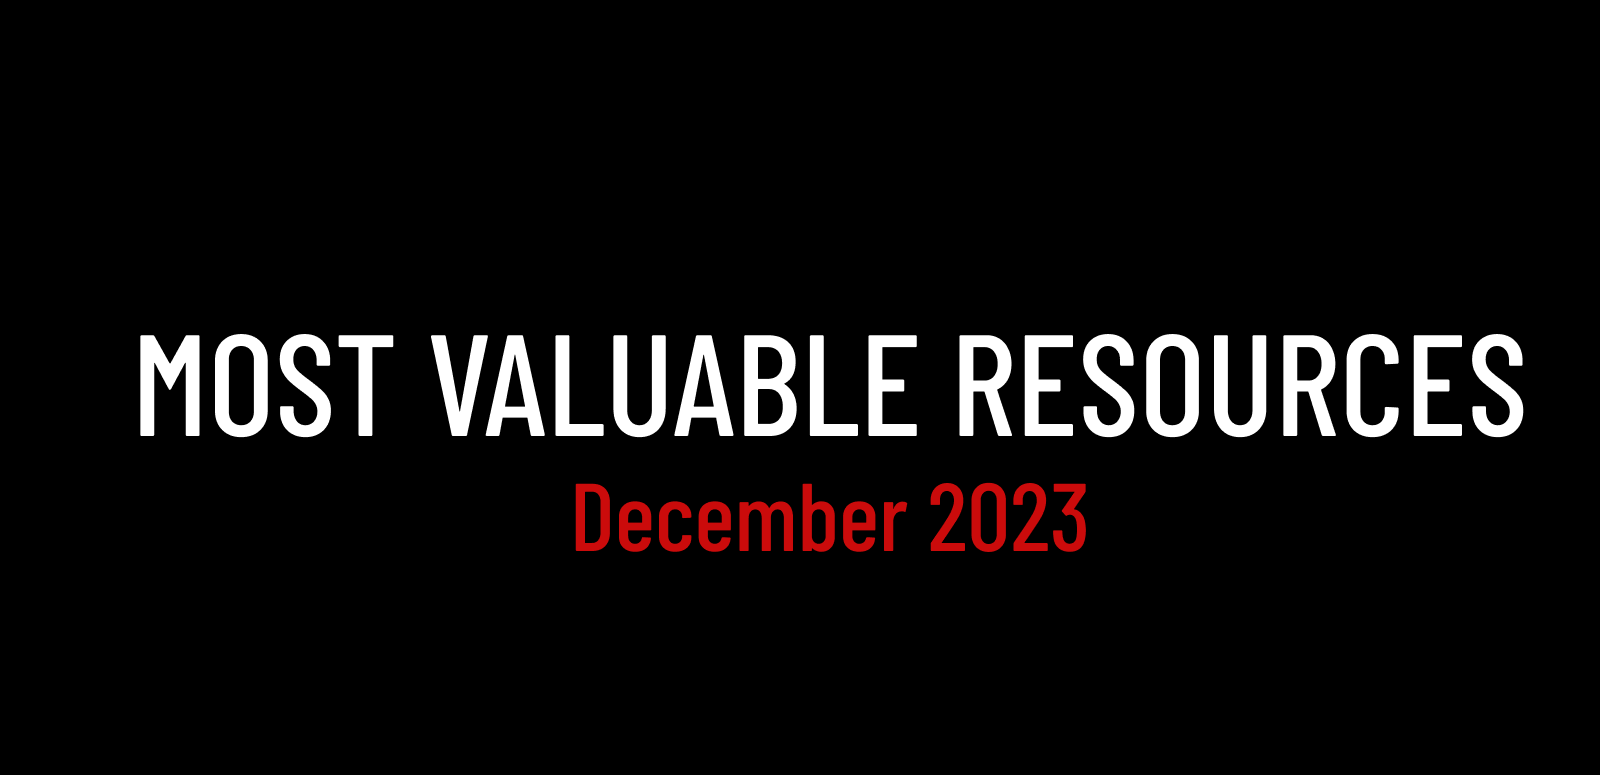 Most Valuable Resources: December 2023